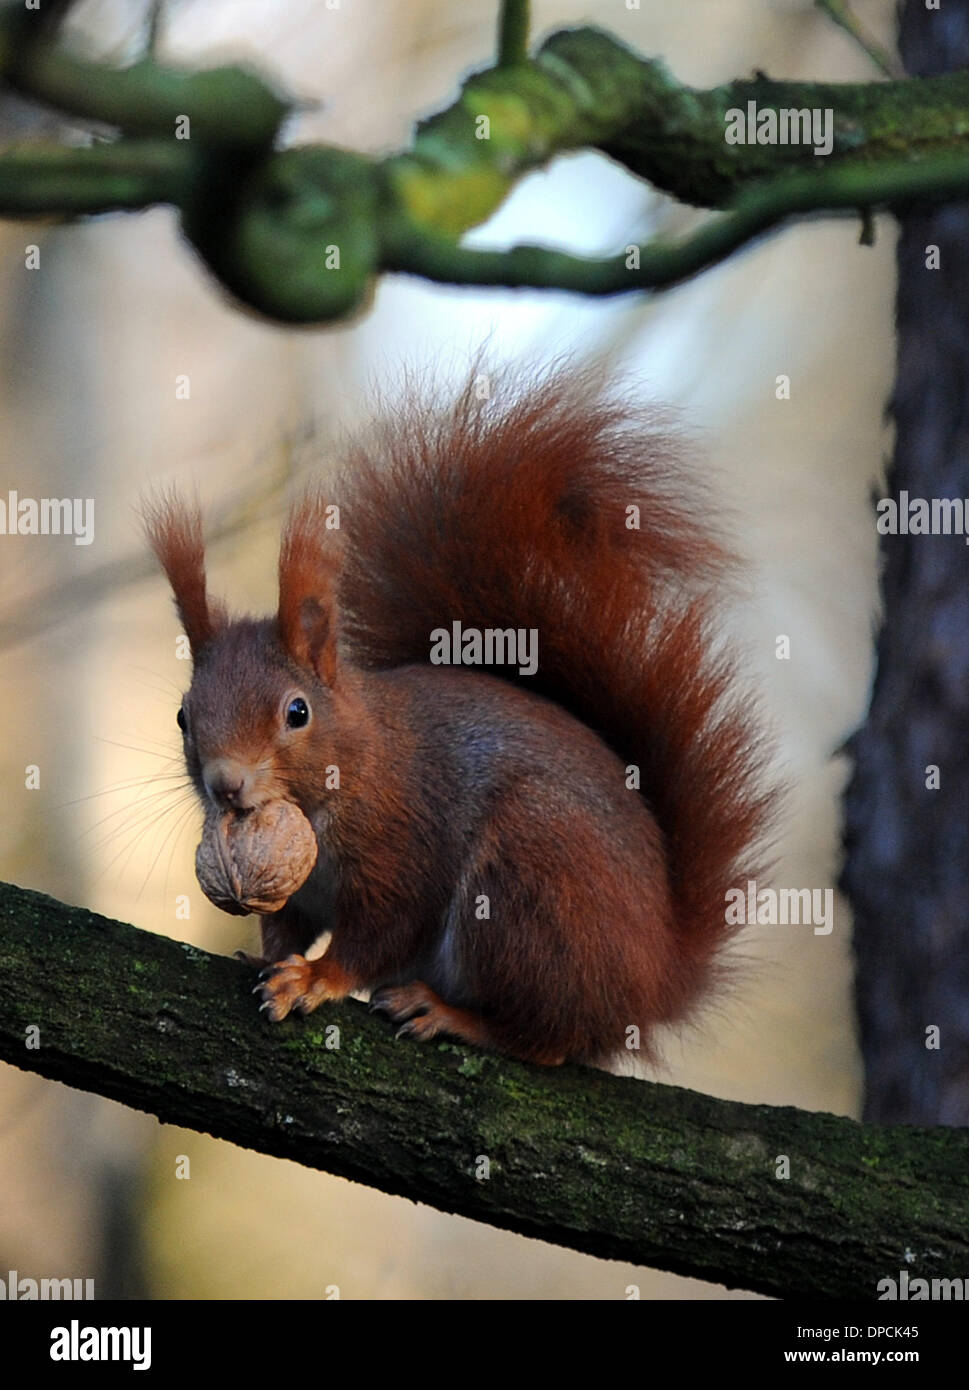 Sottrum, Germany. 12th Jan, 2014. A squirrel sits on a tree branch and holds a walnut between its teeth near Sottrum, Germany, 12 January 2014. Photo: Ingo Wagner/dpa/Alamy Live News Stock Photo